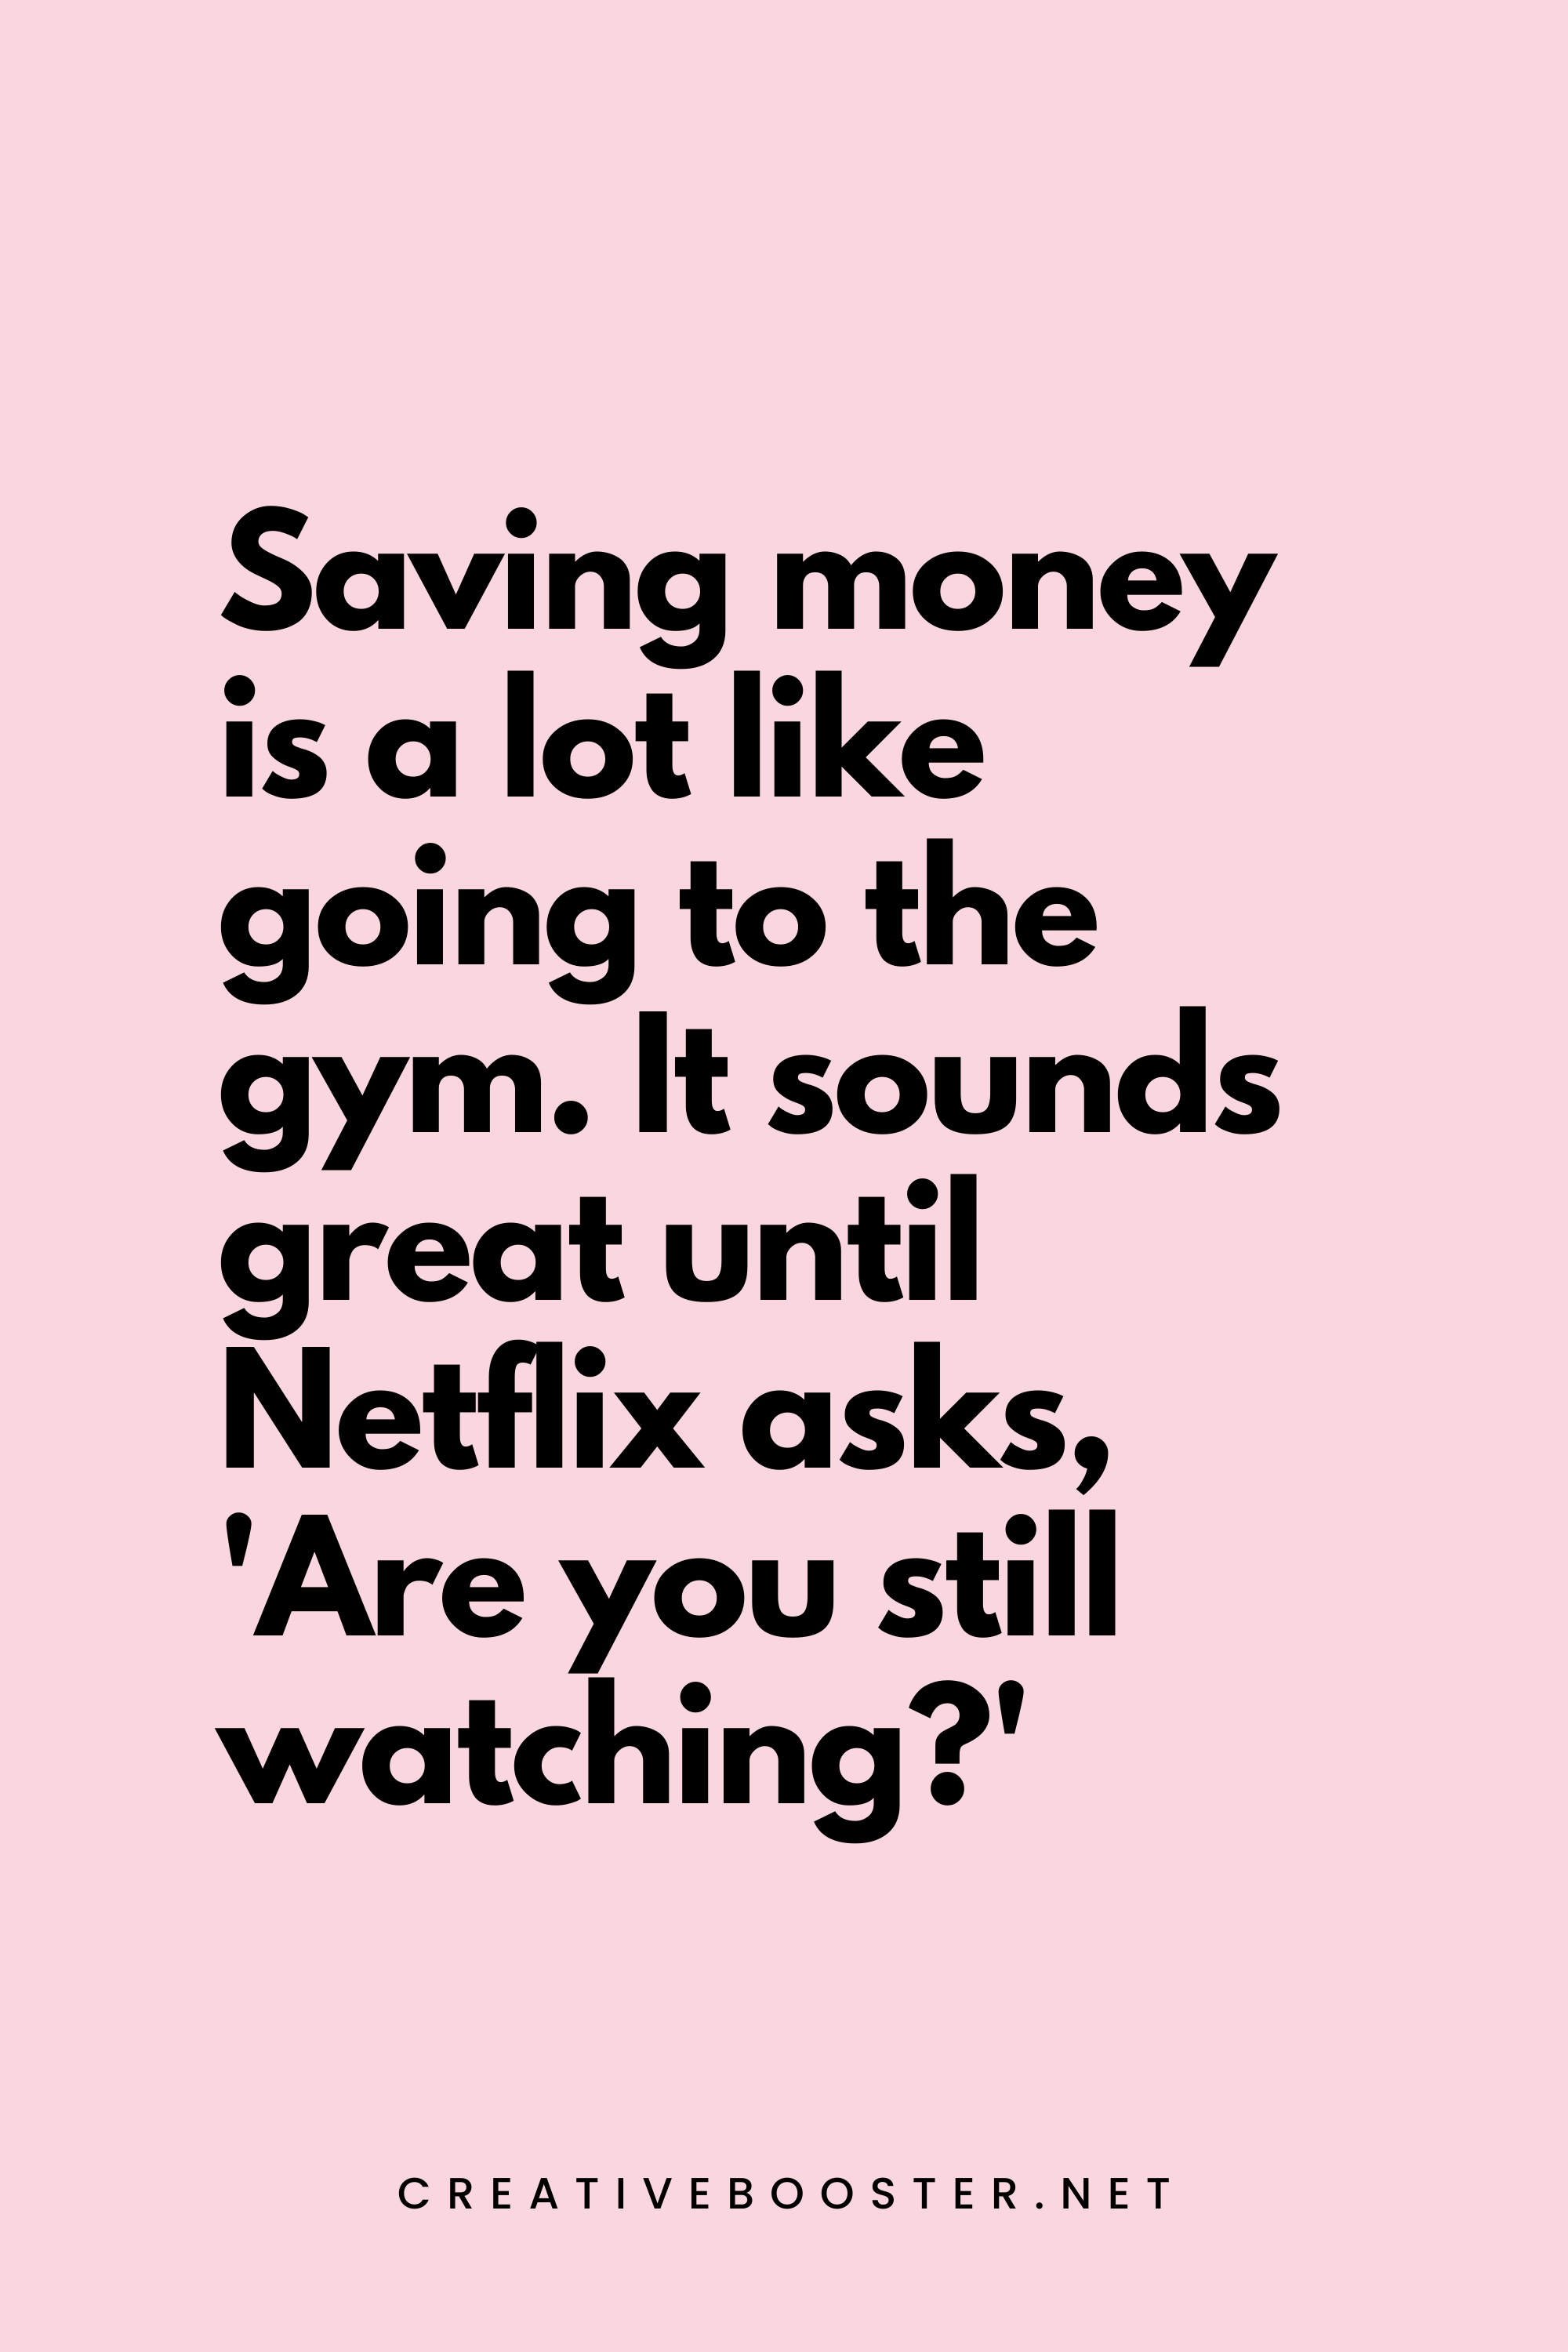 58. Saving money is a lot like going to the gym. It sounds great until Netflix asks, 'Are you still watching?' - Creativebooster.net - 6. Funny Financial Freedom Quotes